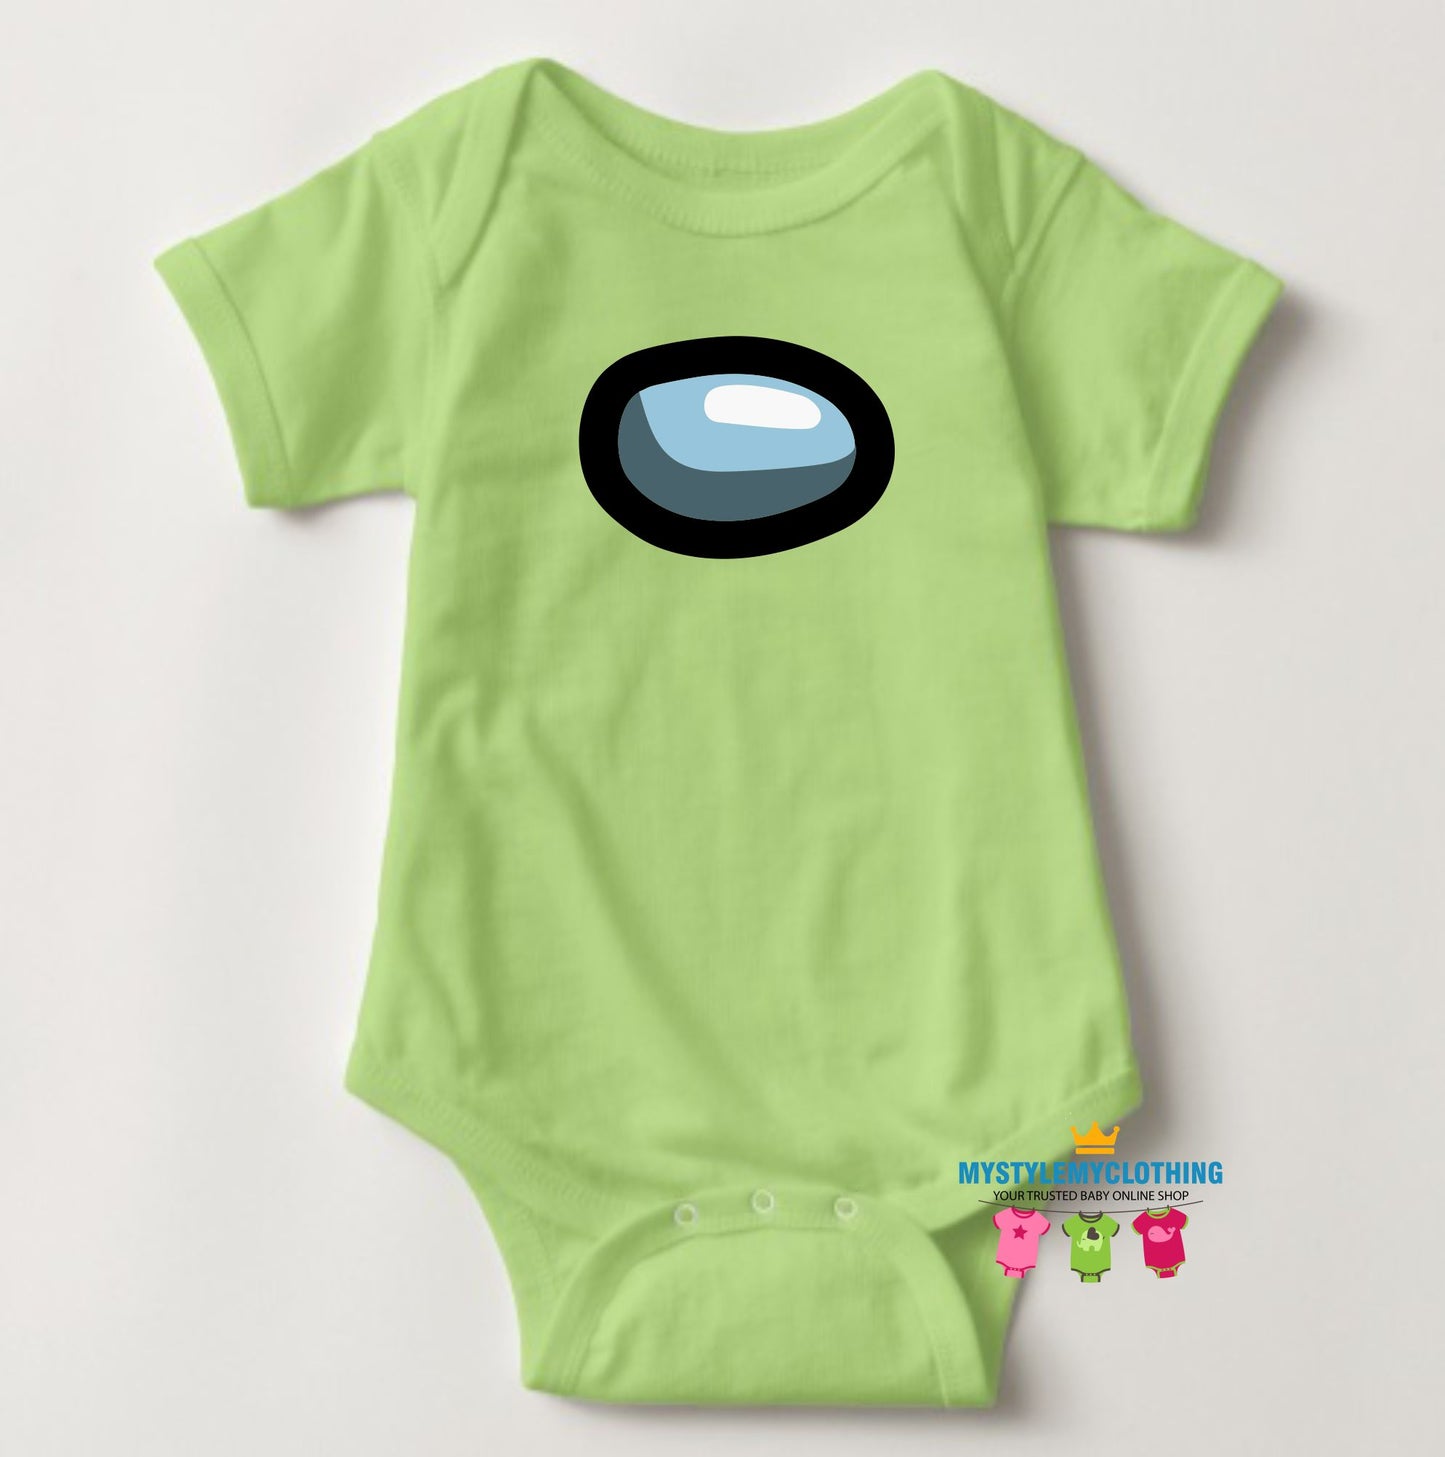 Baby Character Among Us Onesies -  Light Green - MYSTYLEMYCLOTHING